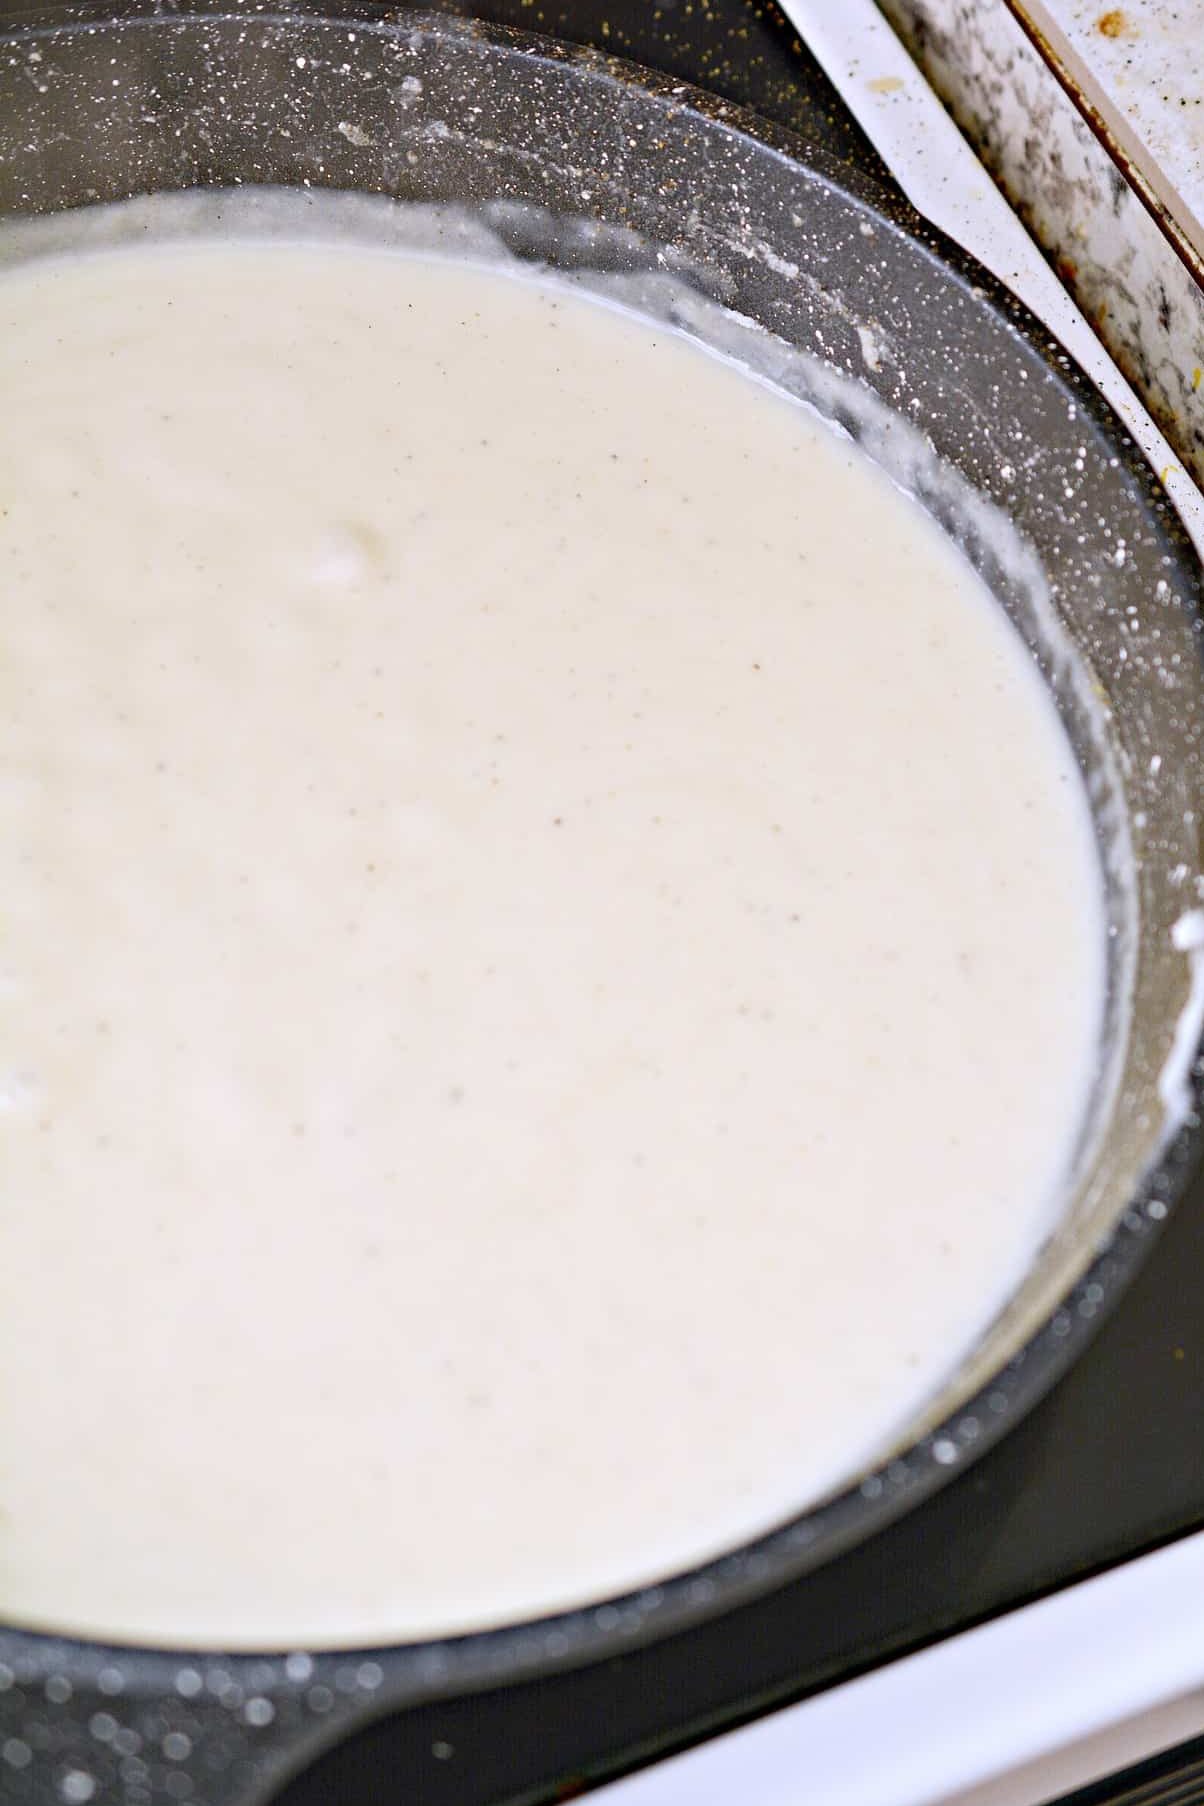 Stir in the heavy whipping cream